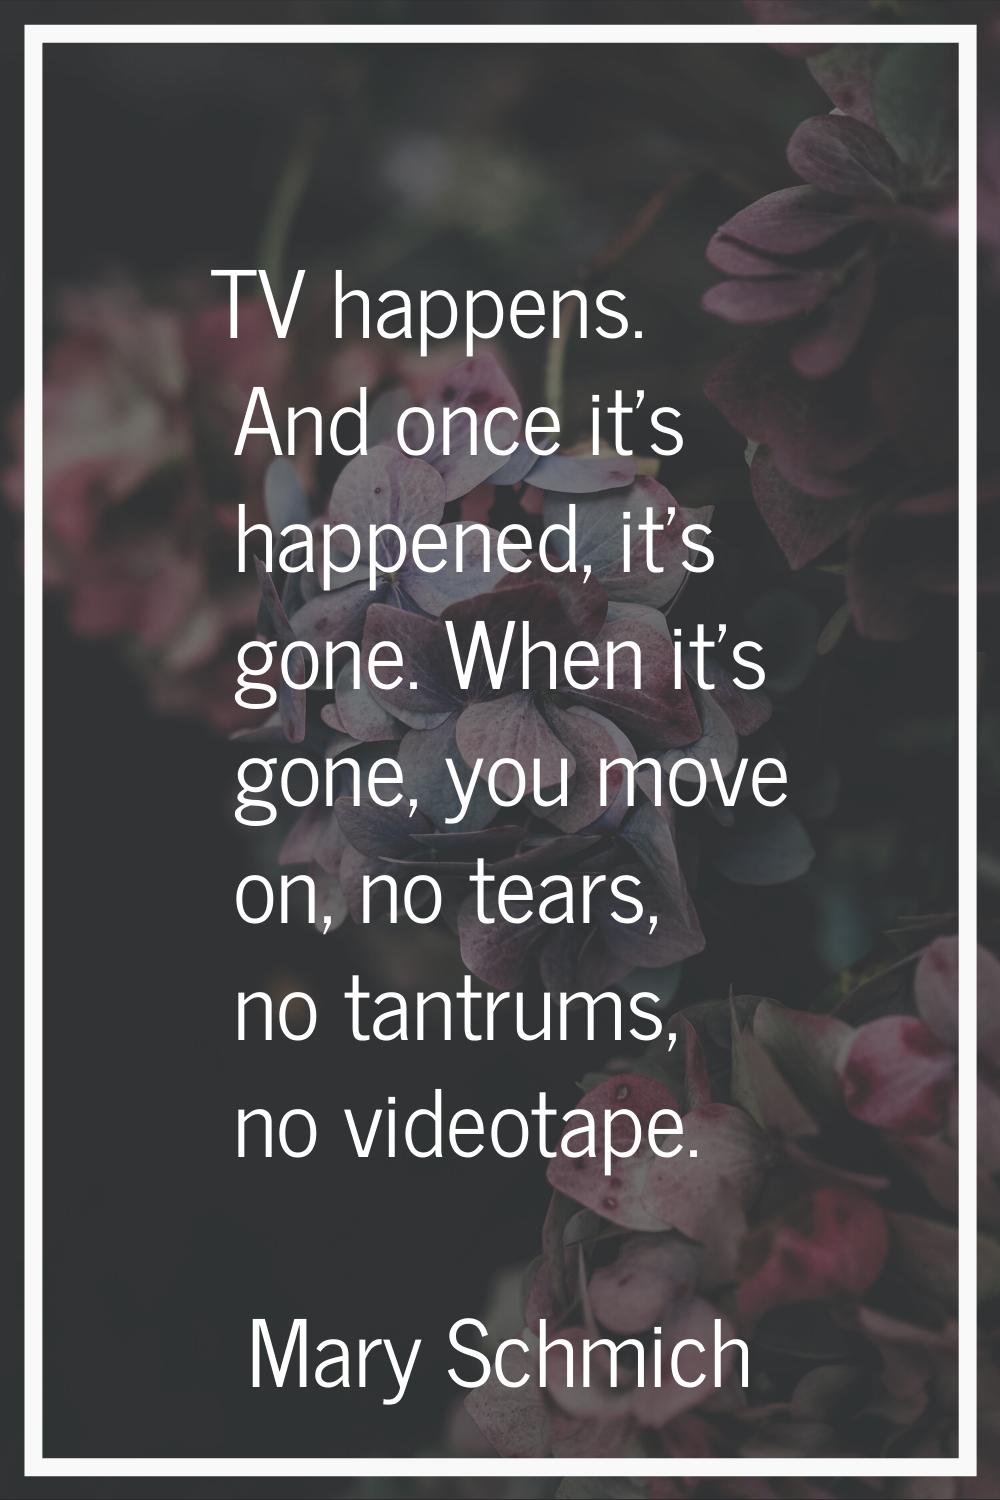 TV happens. And once it's happened, it's gone. When it's gone, you move on, no tears, no tantrums, 